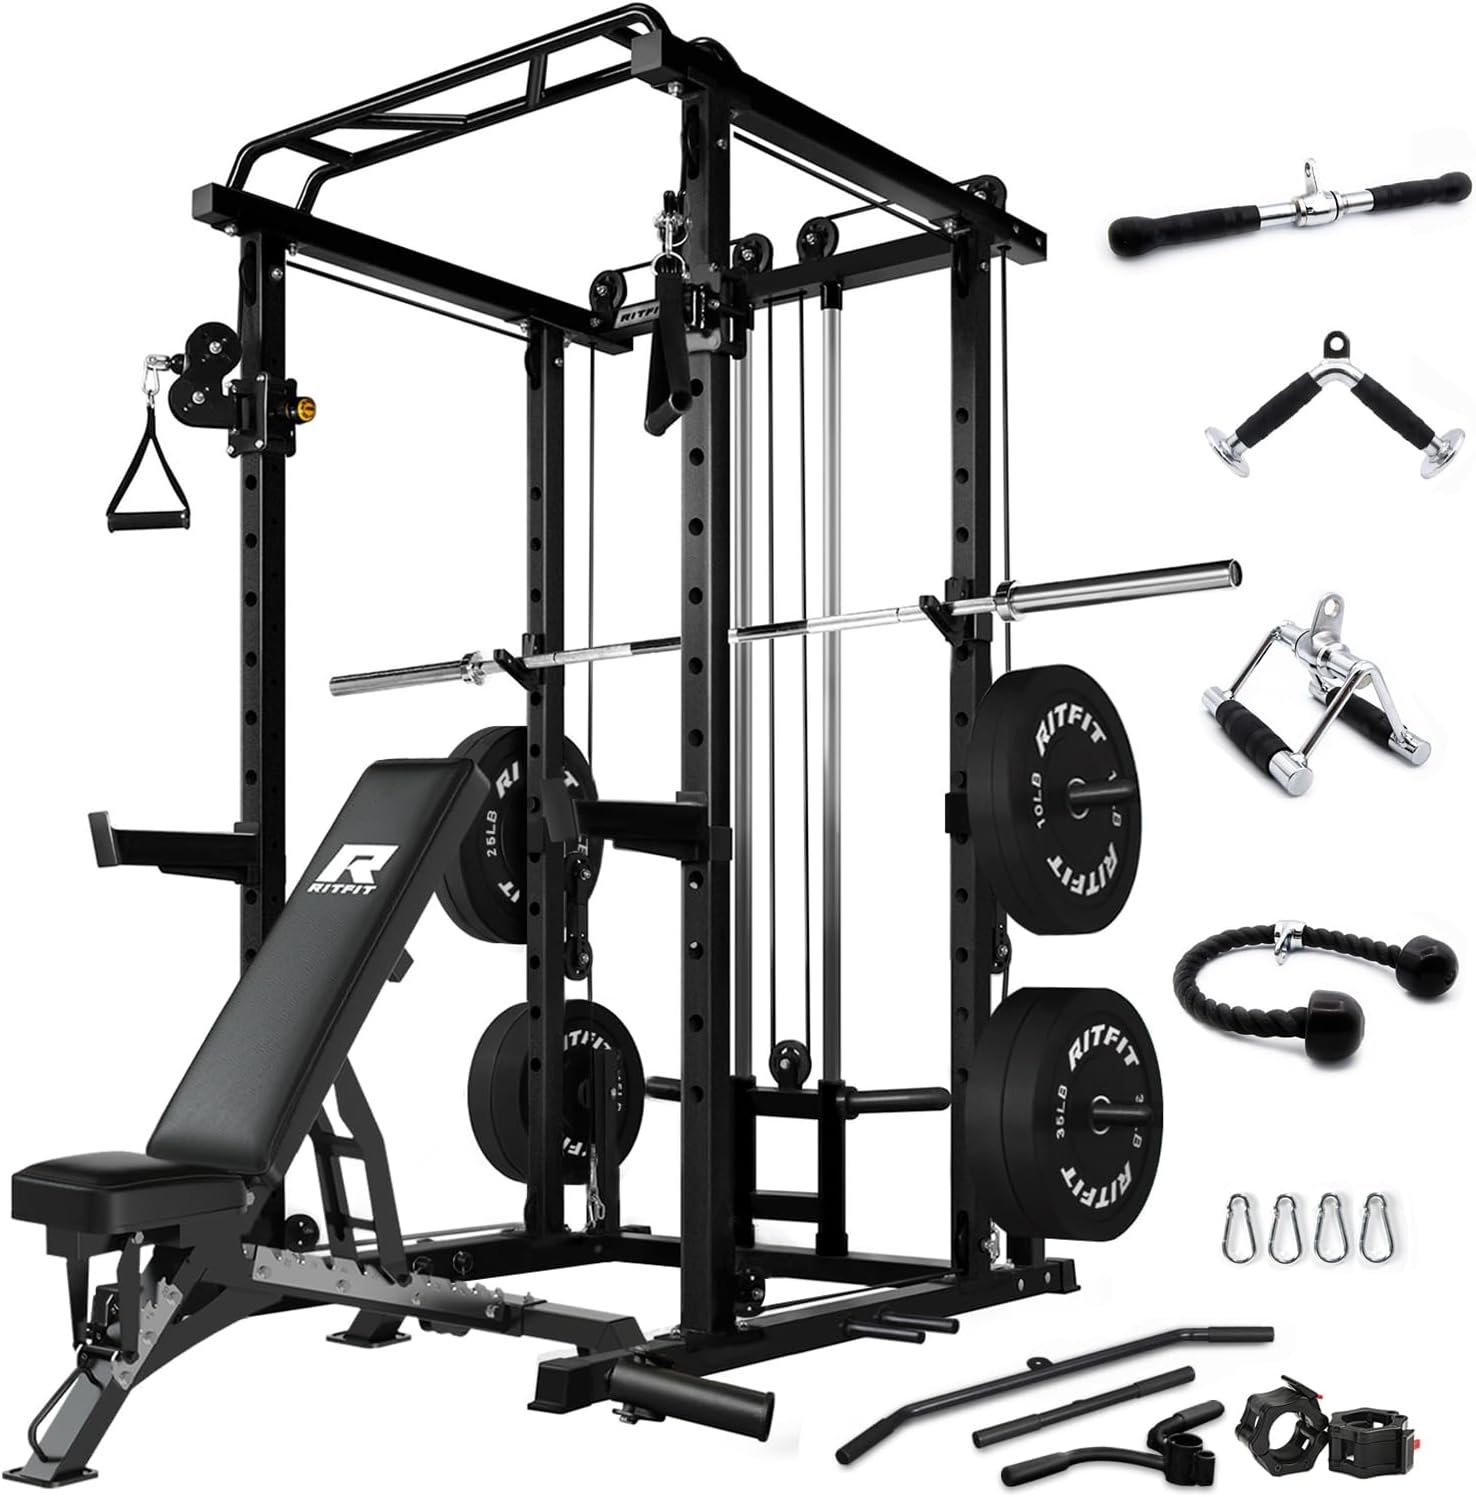 RitFit Multi-function Squat Rack Power Cage PPC03 Review